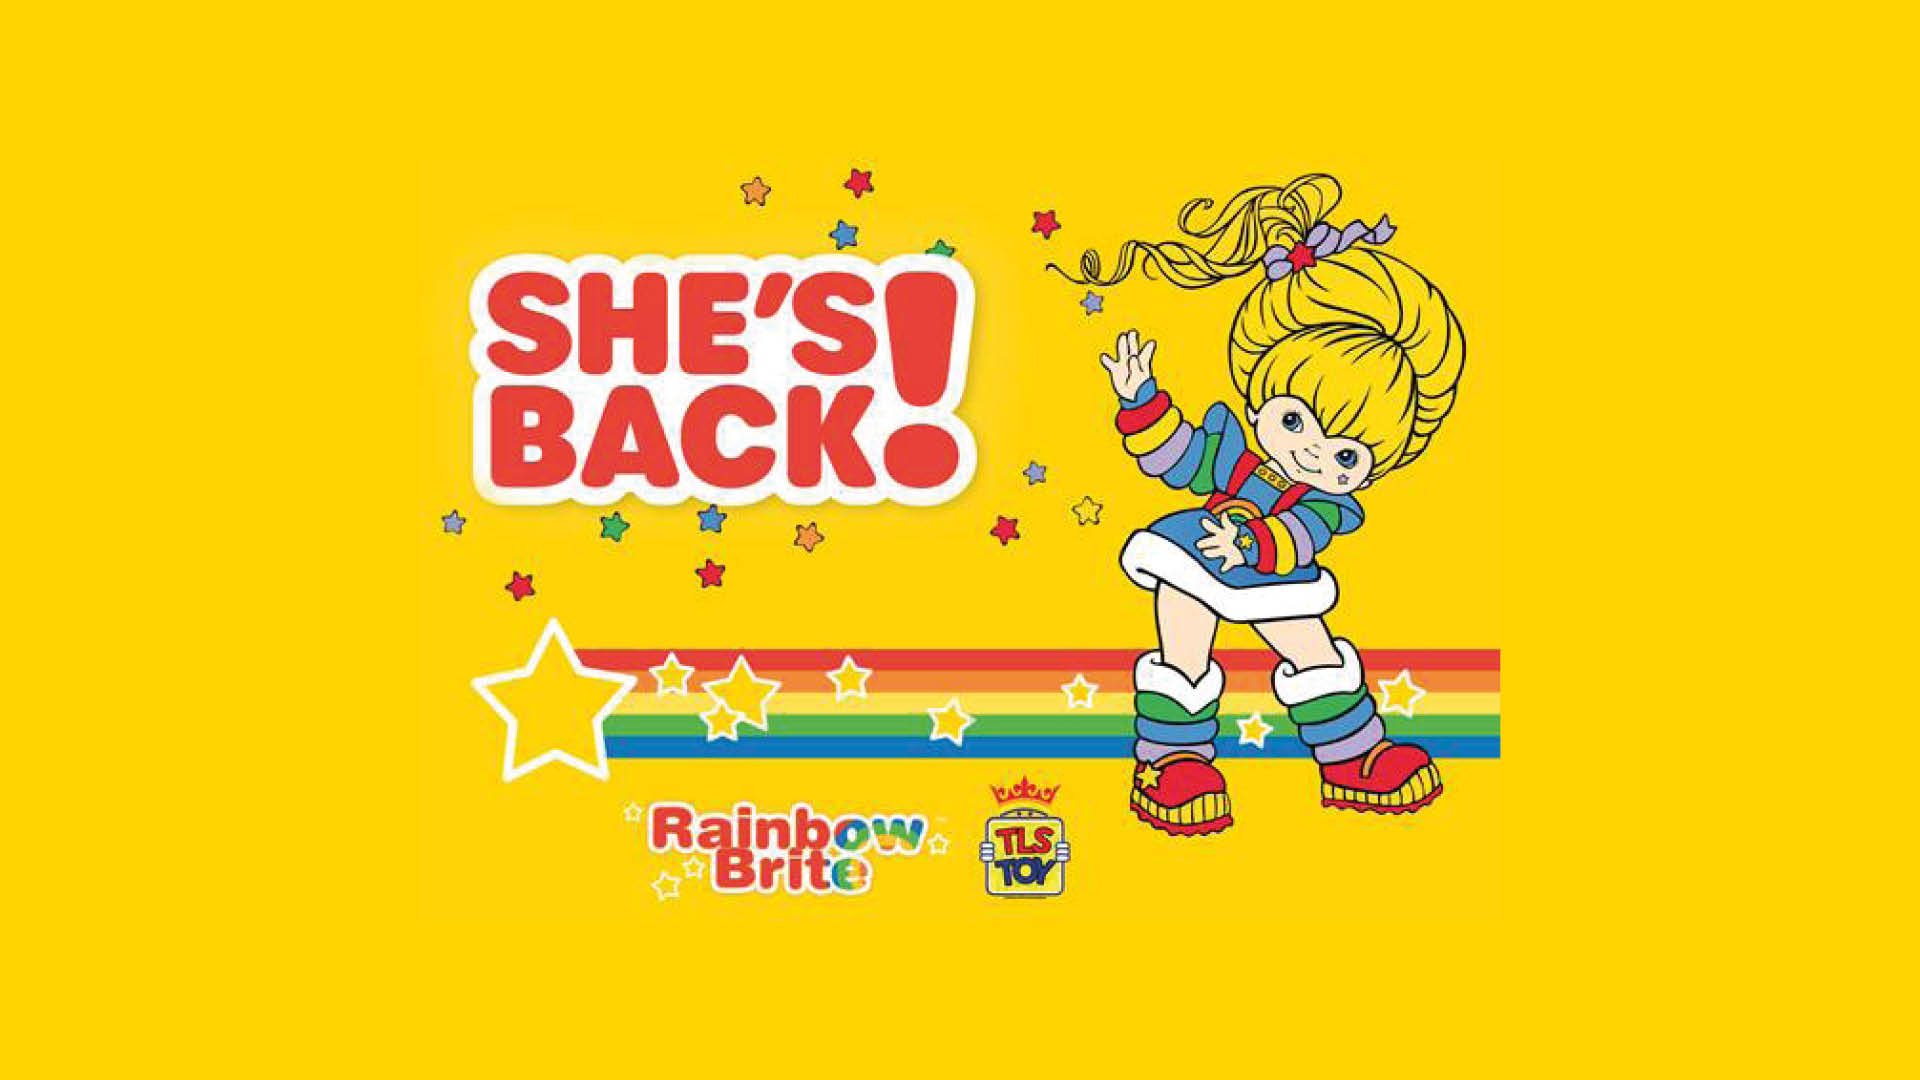 Exciting news for 80s kids: Rainbow Brite dolls are back!